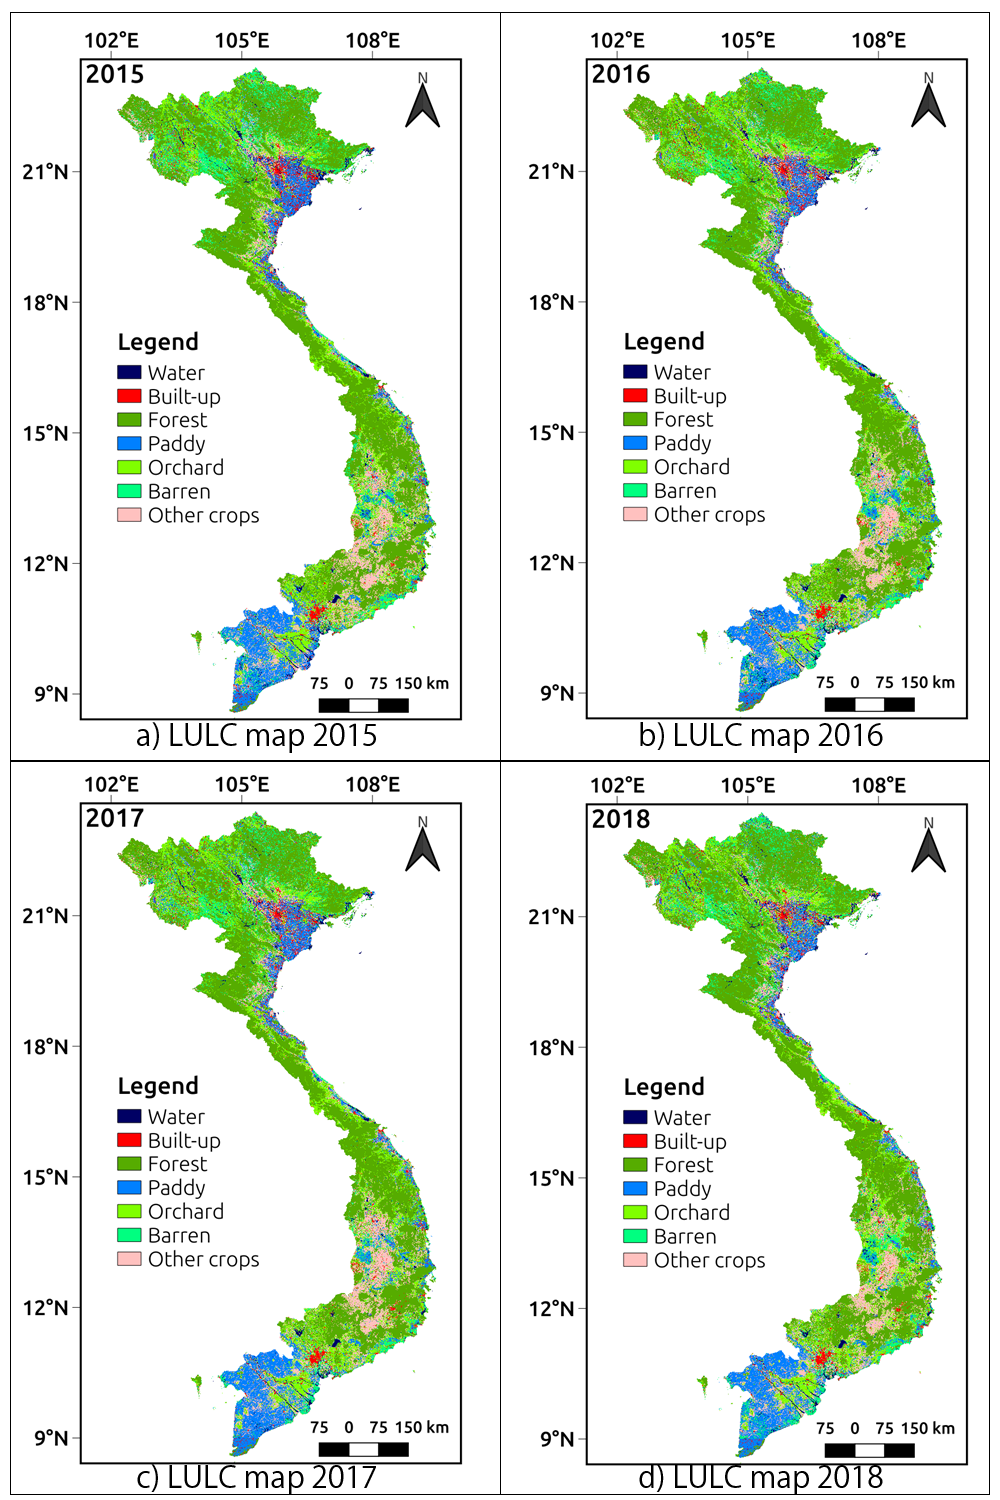 Figure 1: LULC maps in Vietnam from 2015 to 2018.